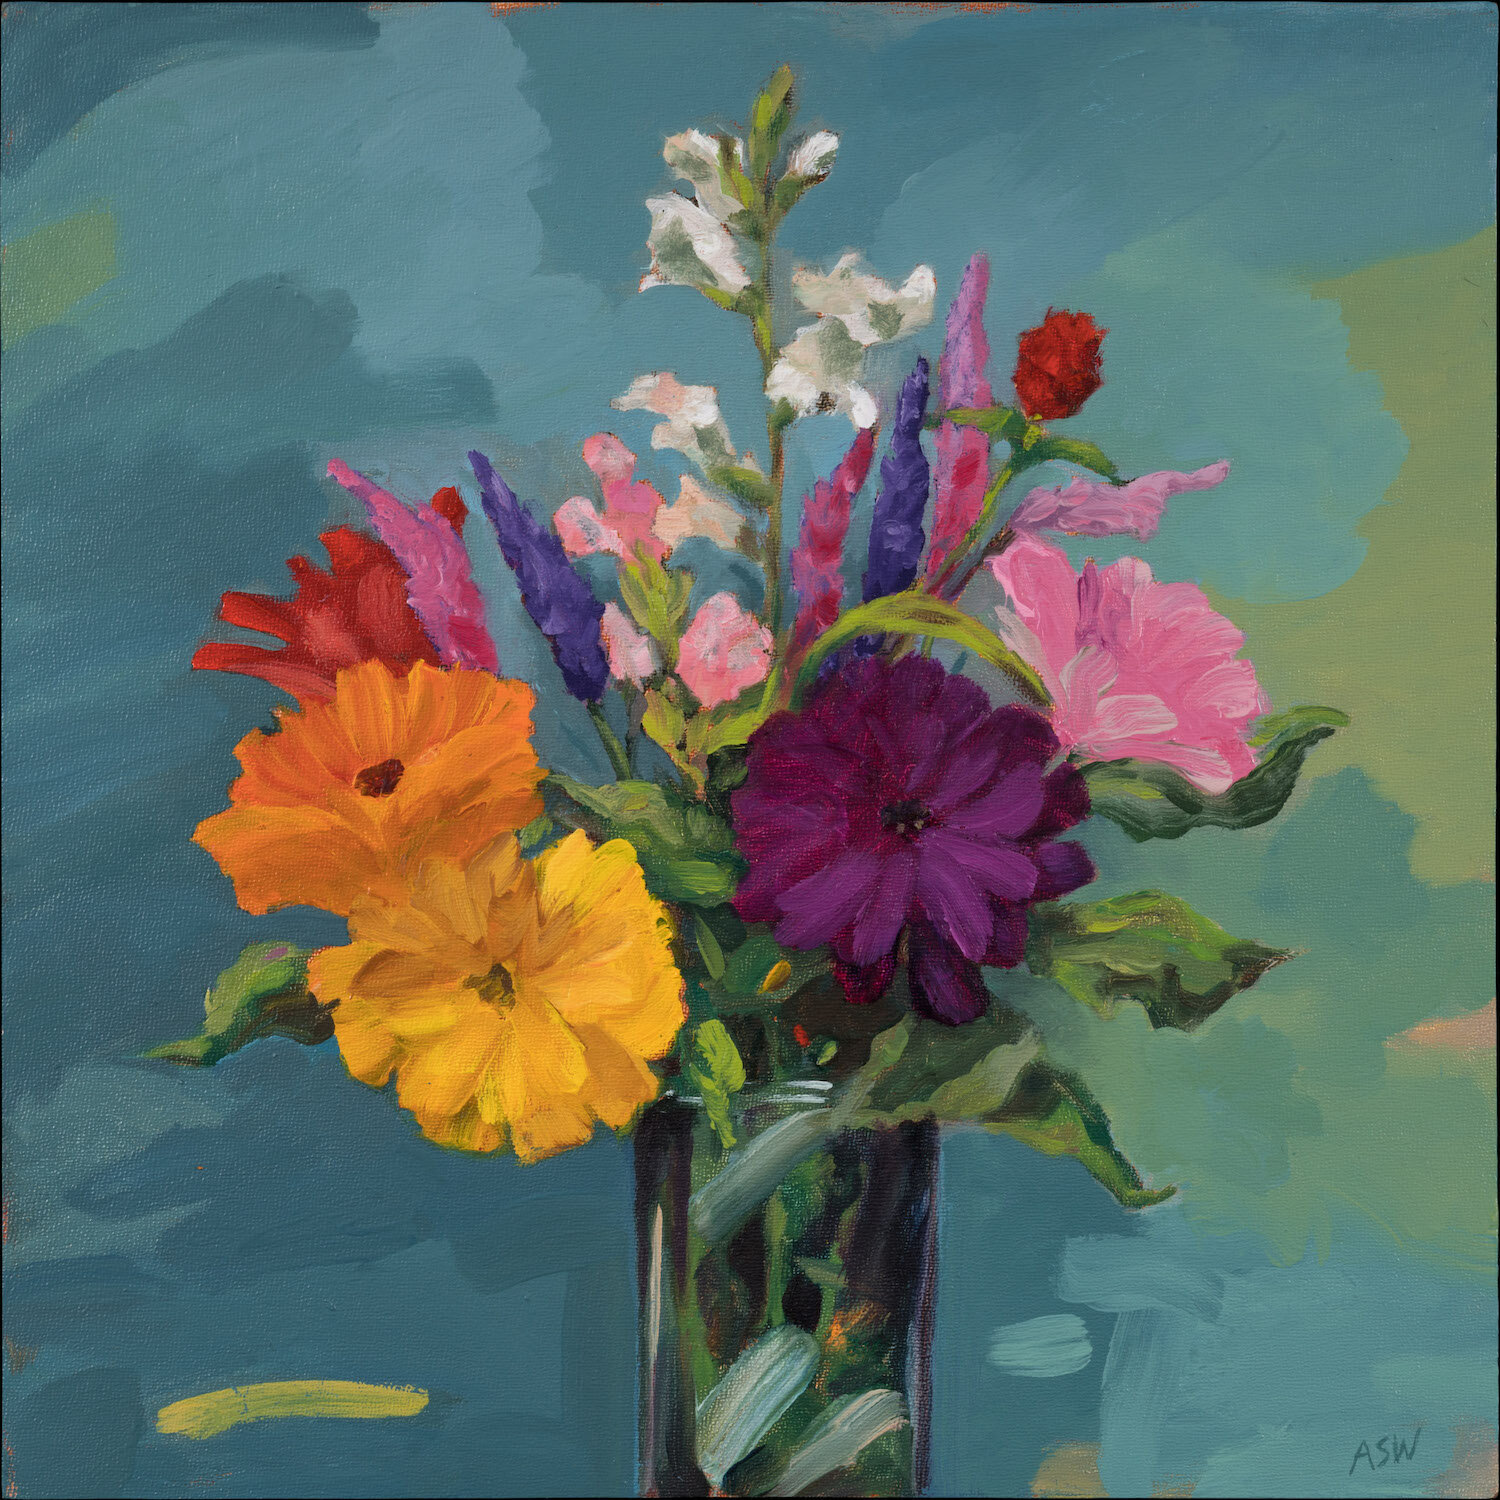 "Last of the Summer Flowers" by Anne Sargent Walker